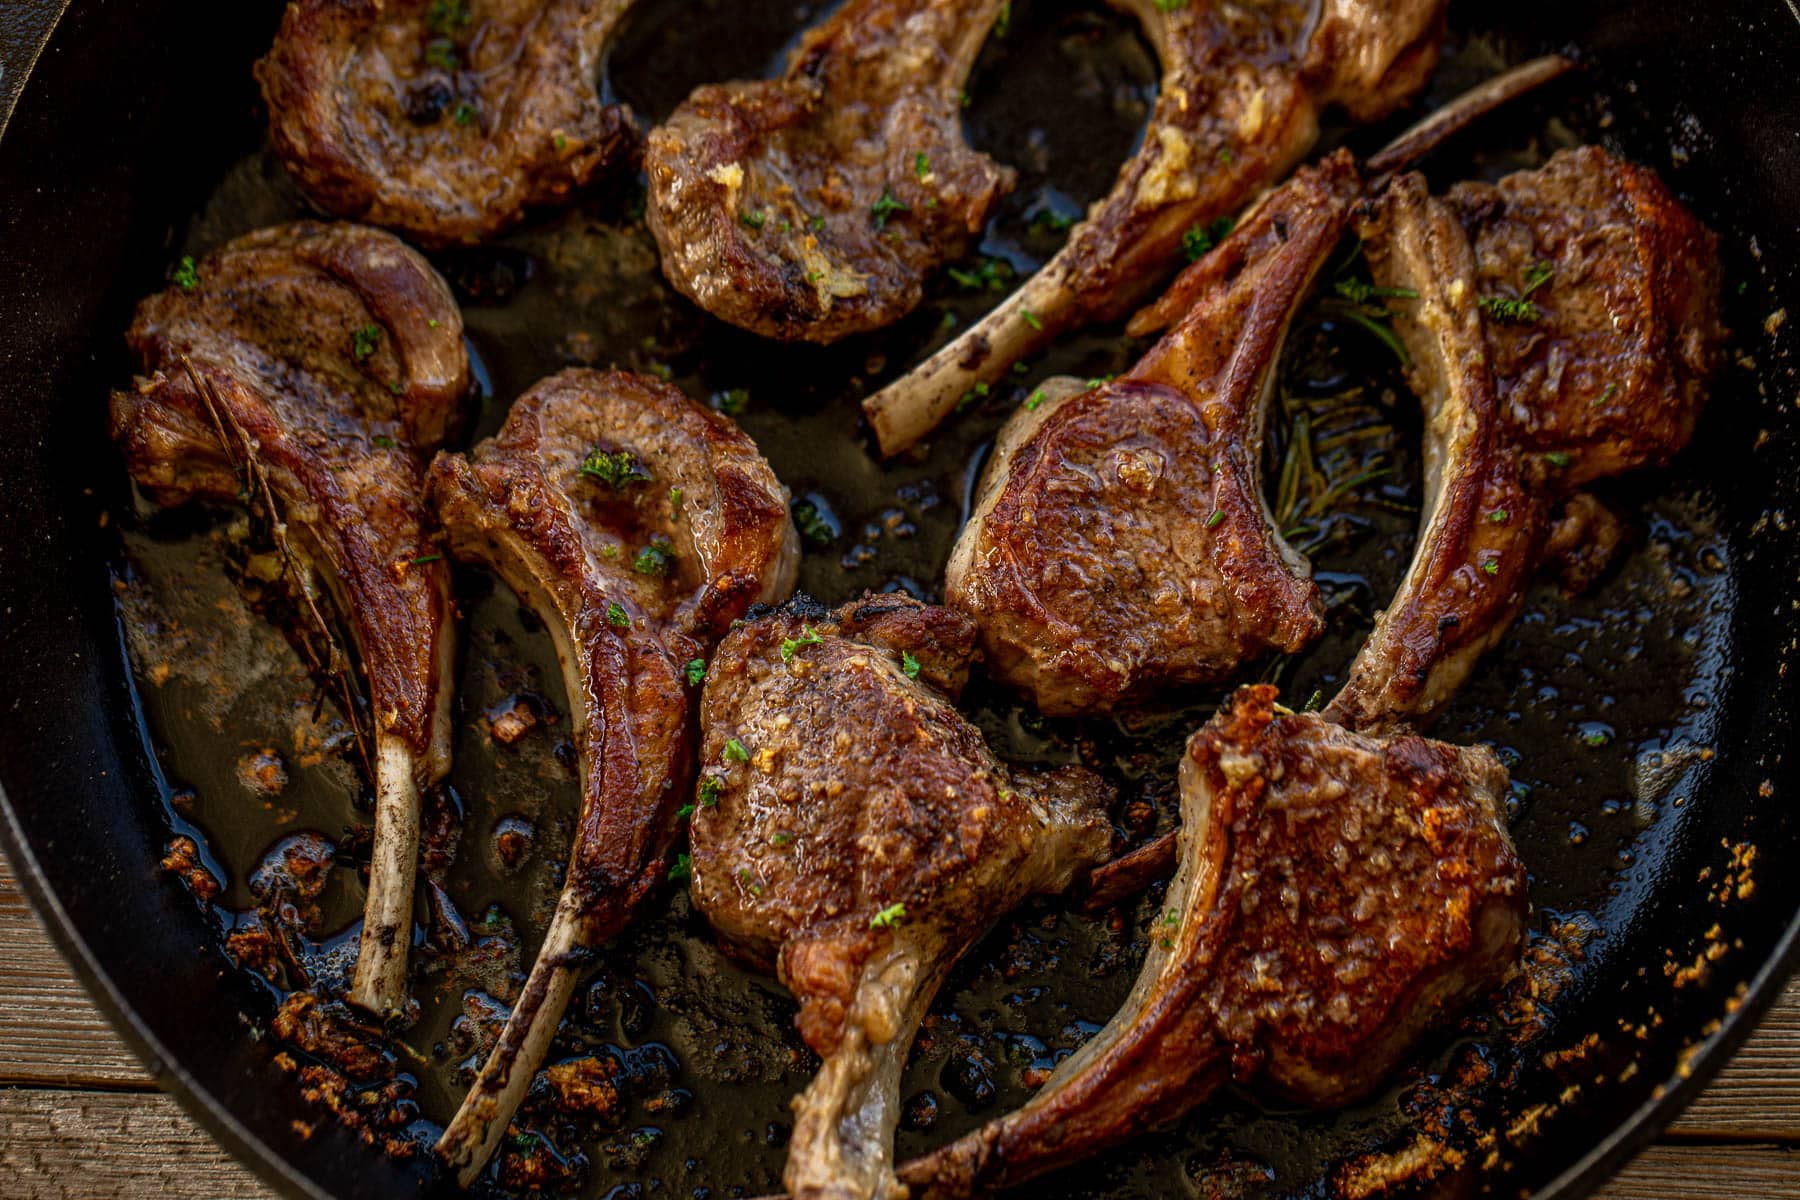 landscape photo of cooked lamb chops